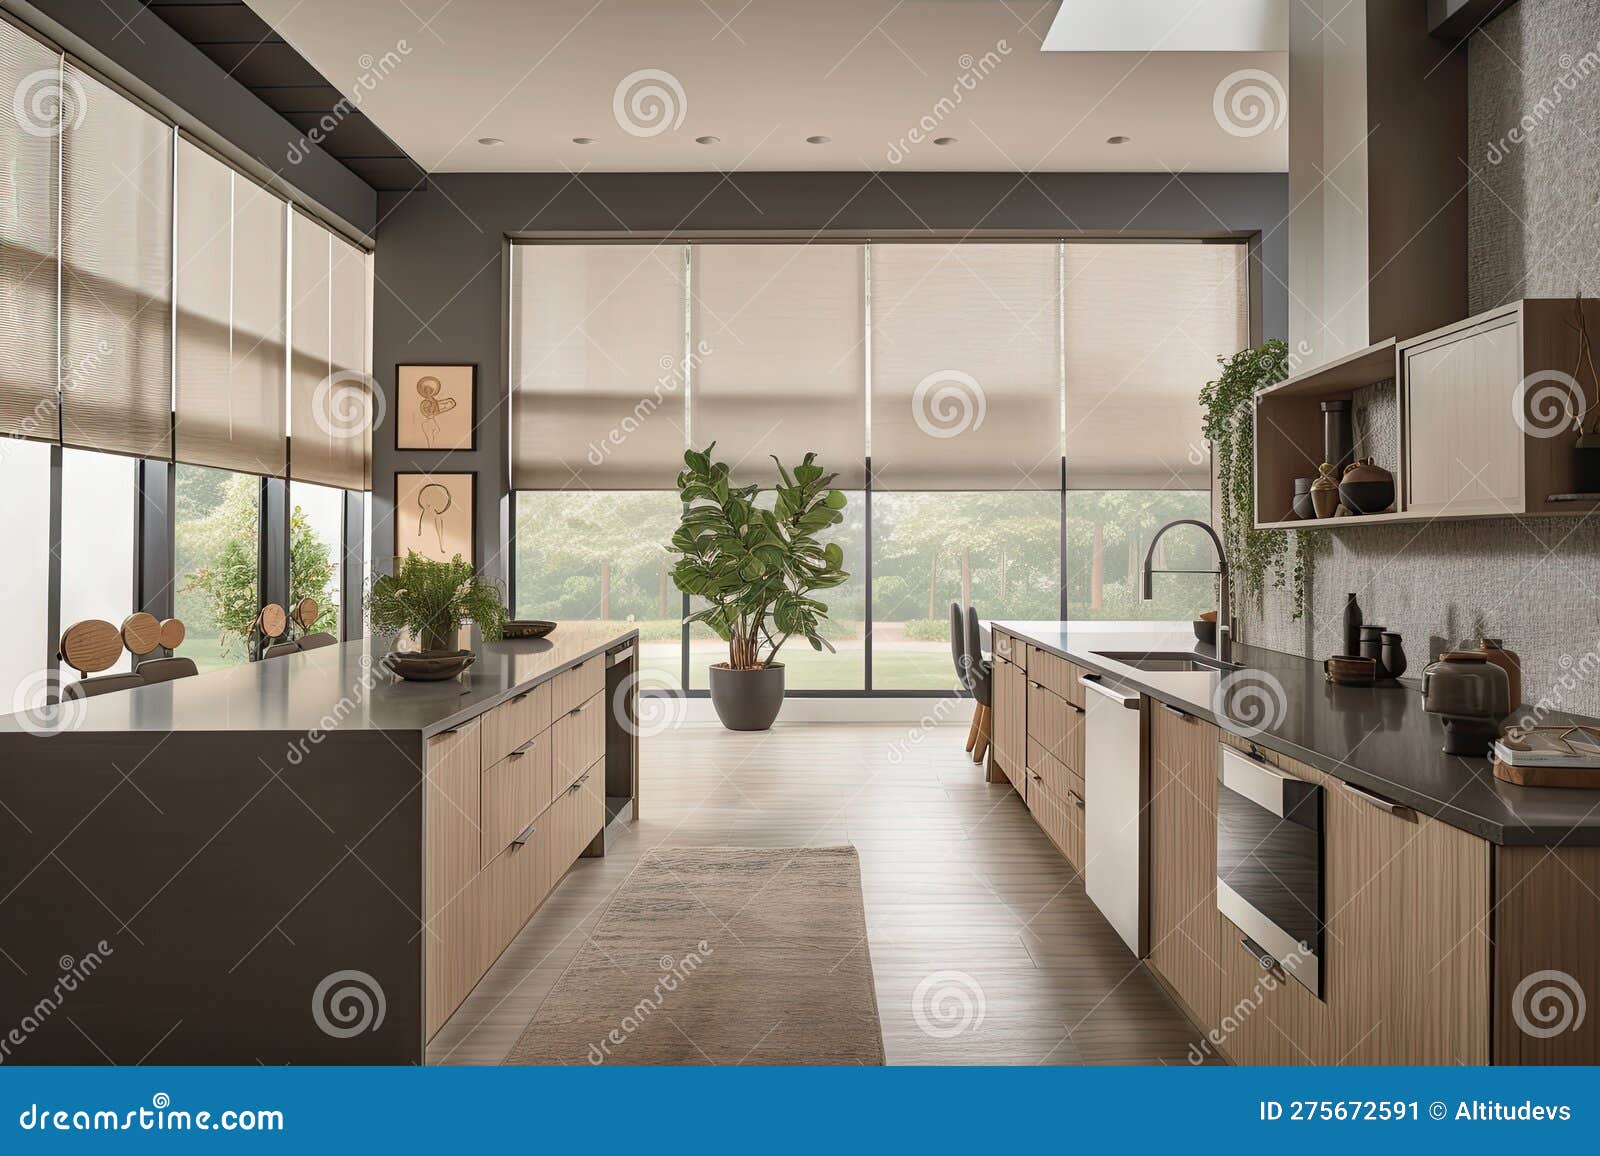 kitchen with automated blinds and custom window treatments that match cabinets